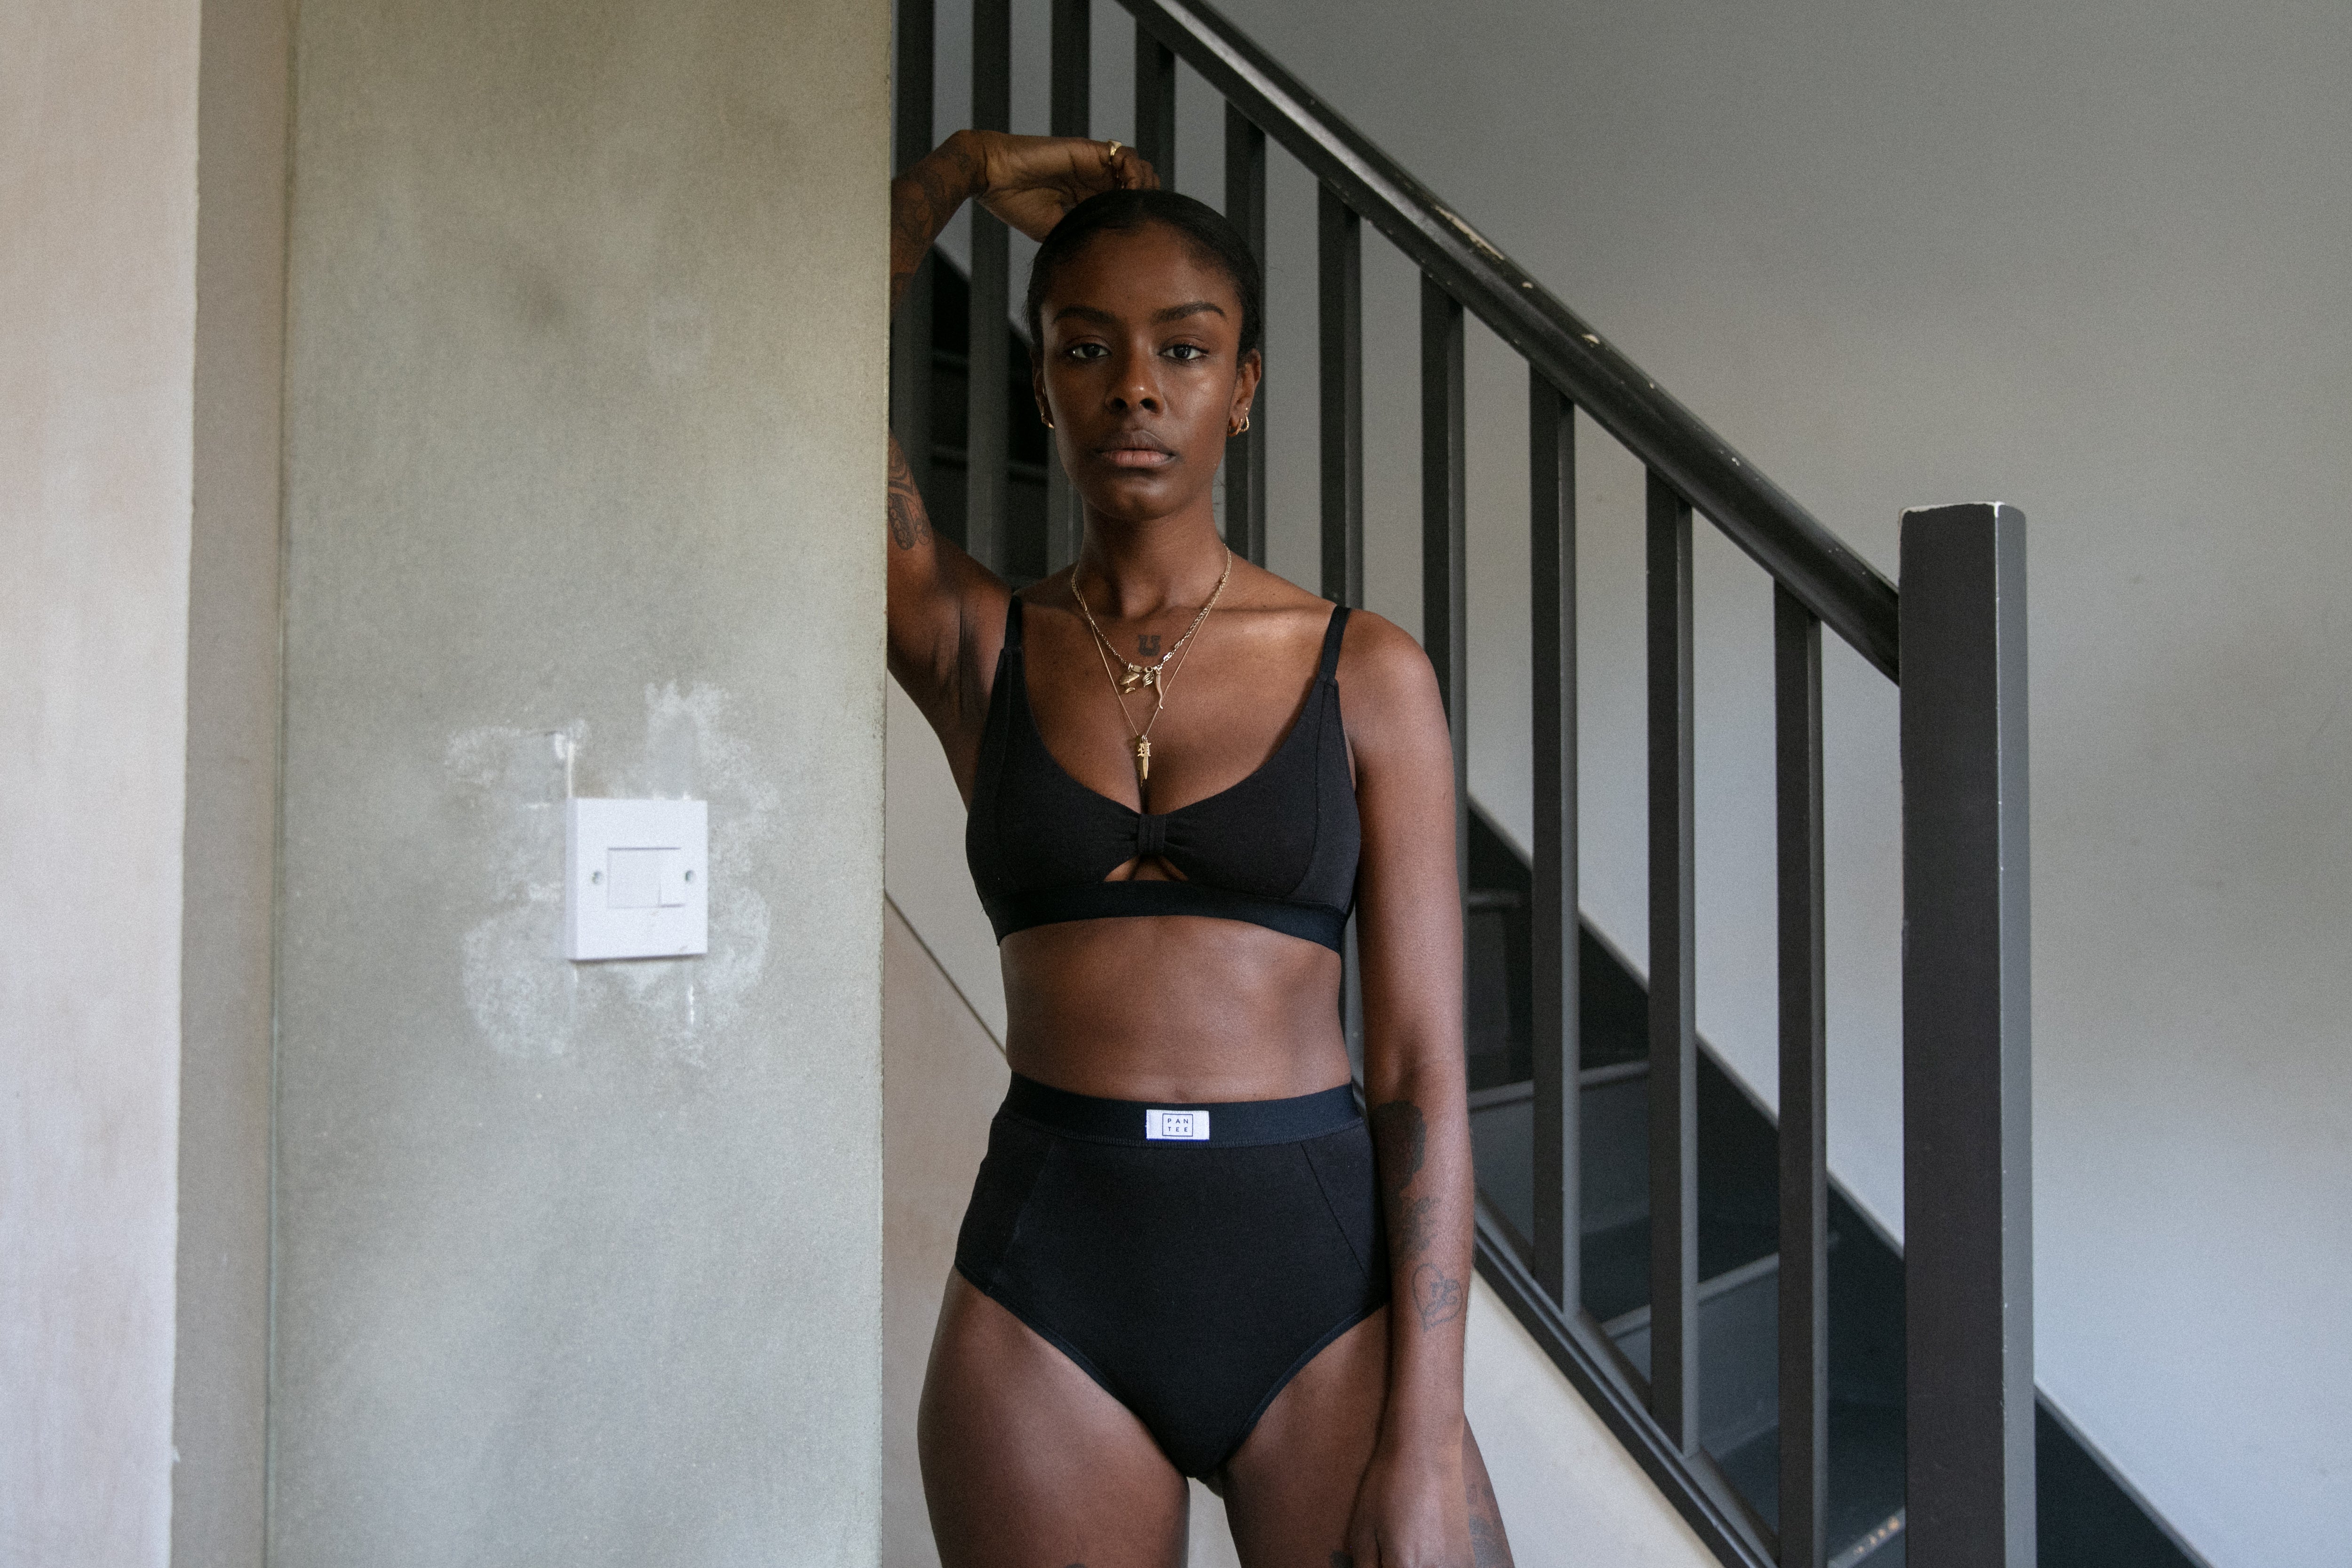 A model posing in front of a staircase wearing a black Pantee set